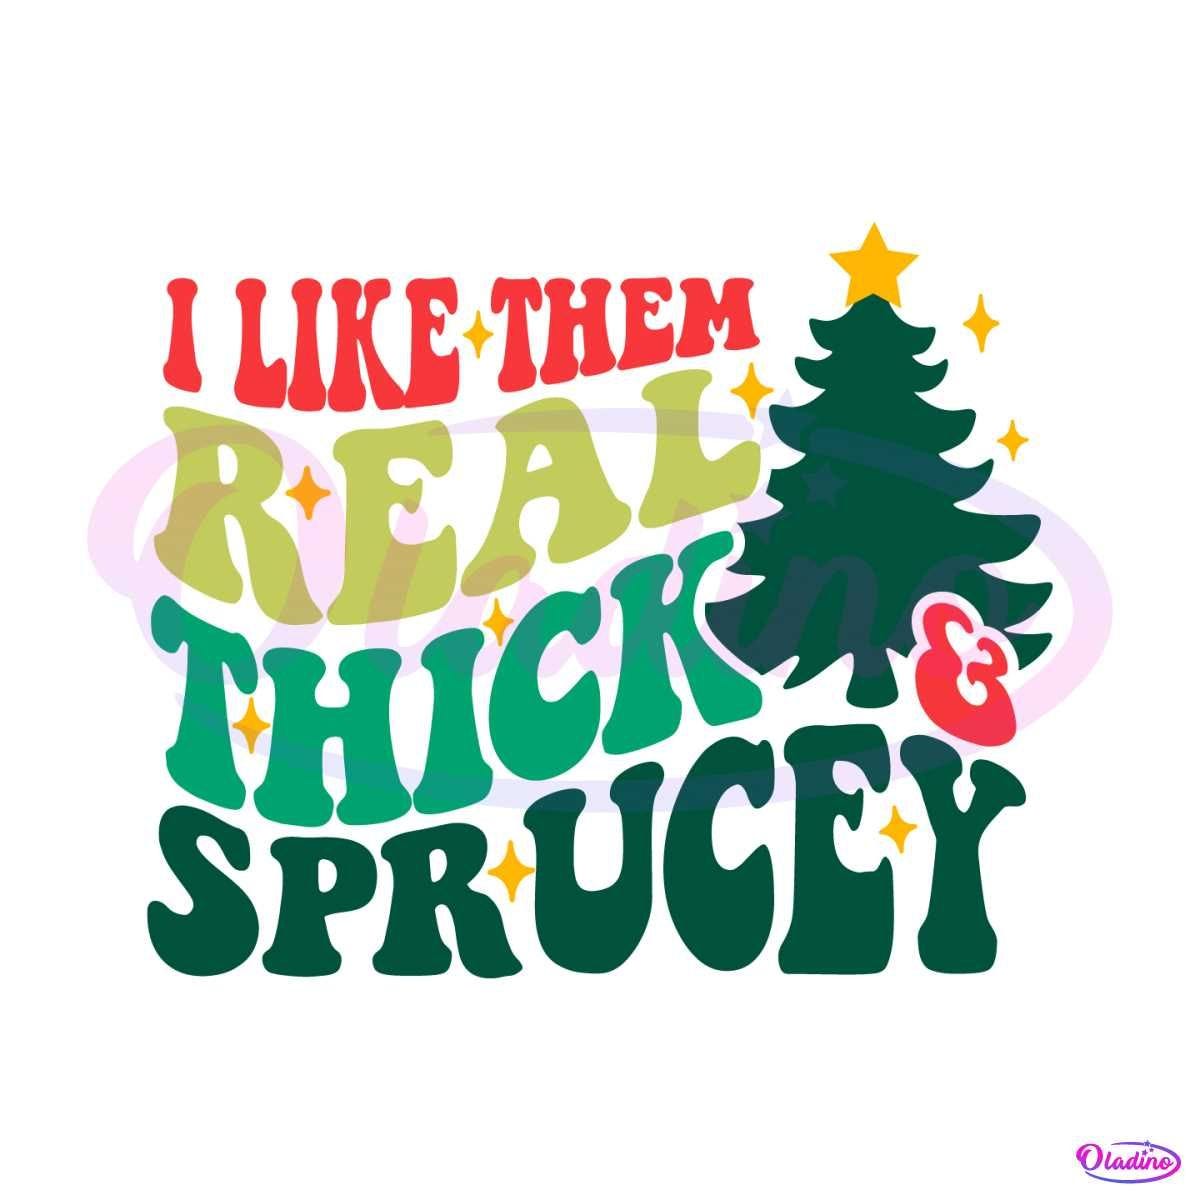 Like Them Real Thick And Sprucey SVG